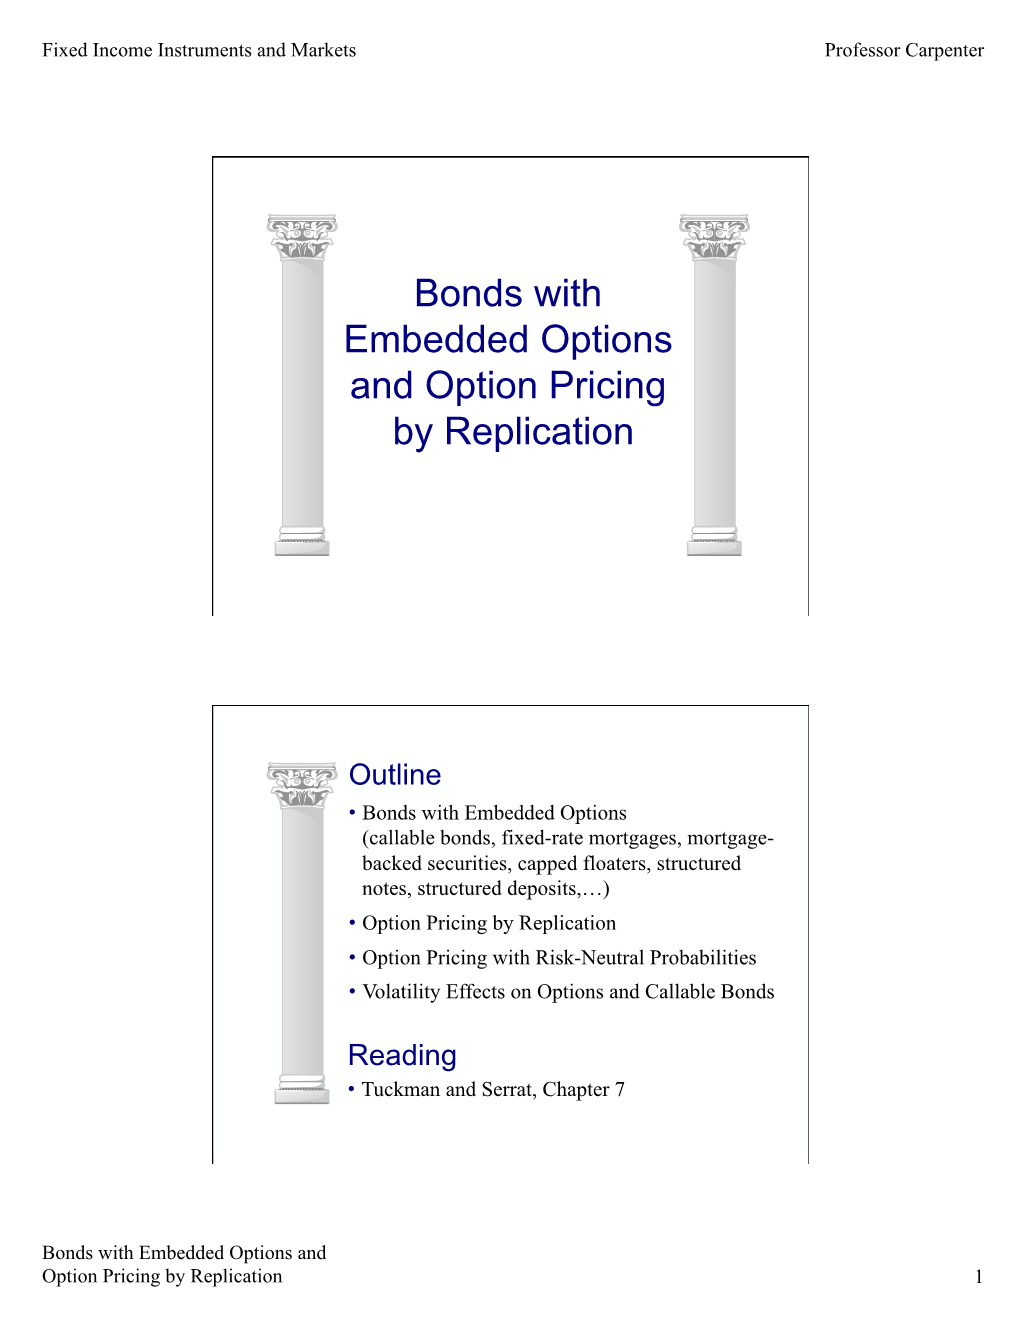 14 Bonds with Embedded Options and Option Pricing by Replication.Pptx